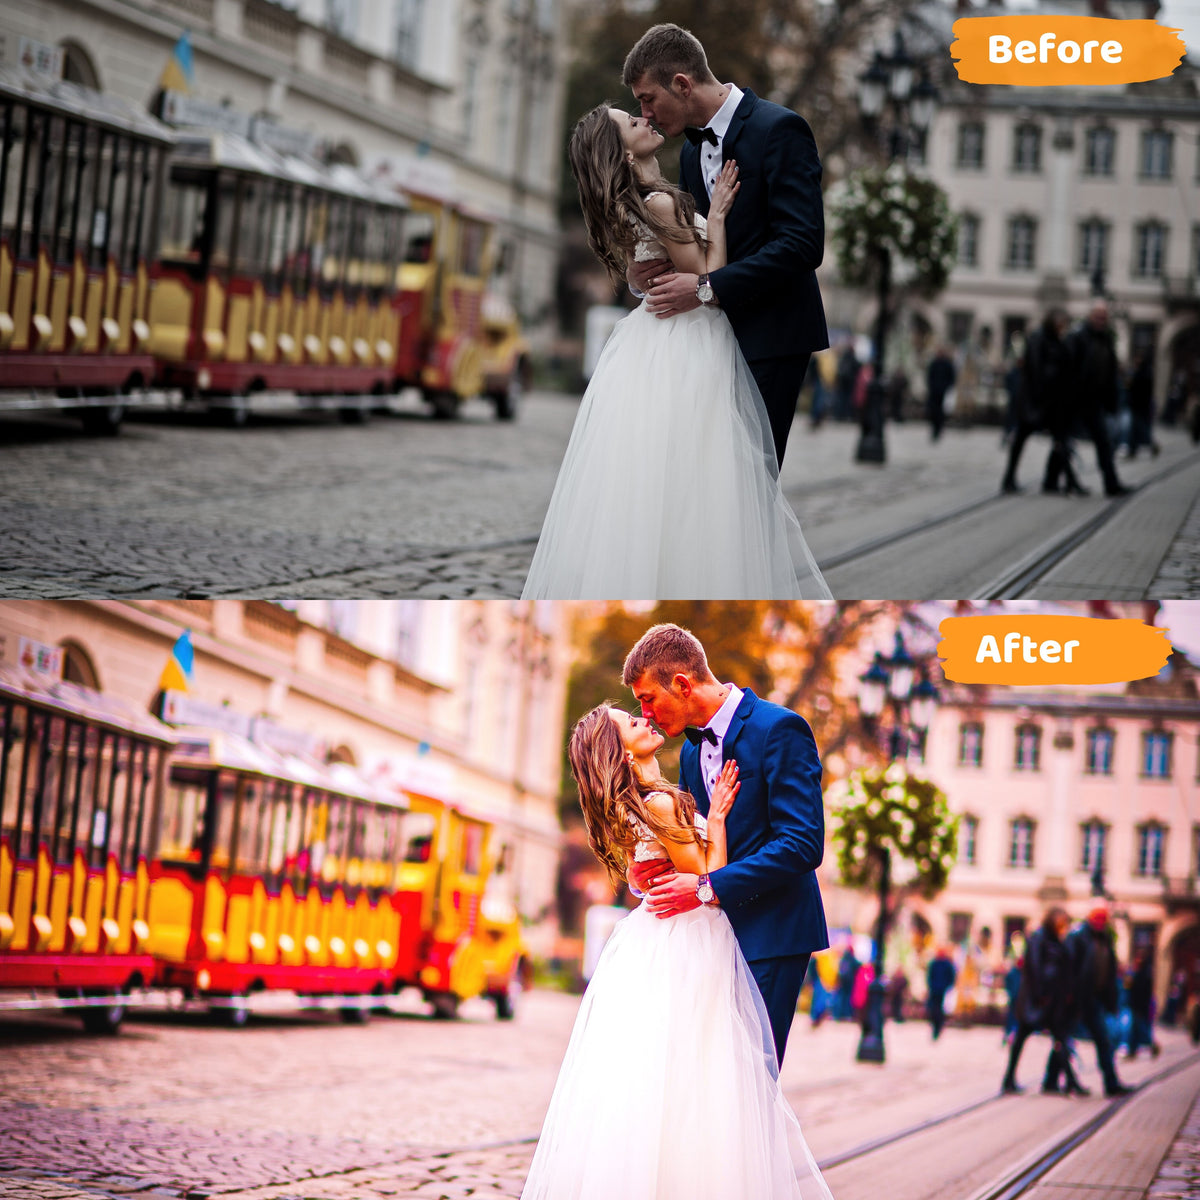 Wedding Presets Before and After